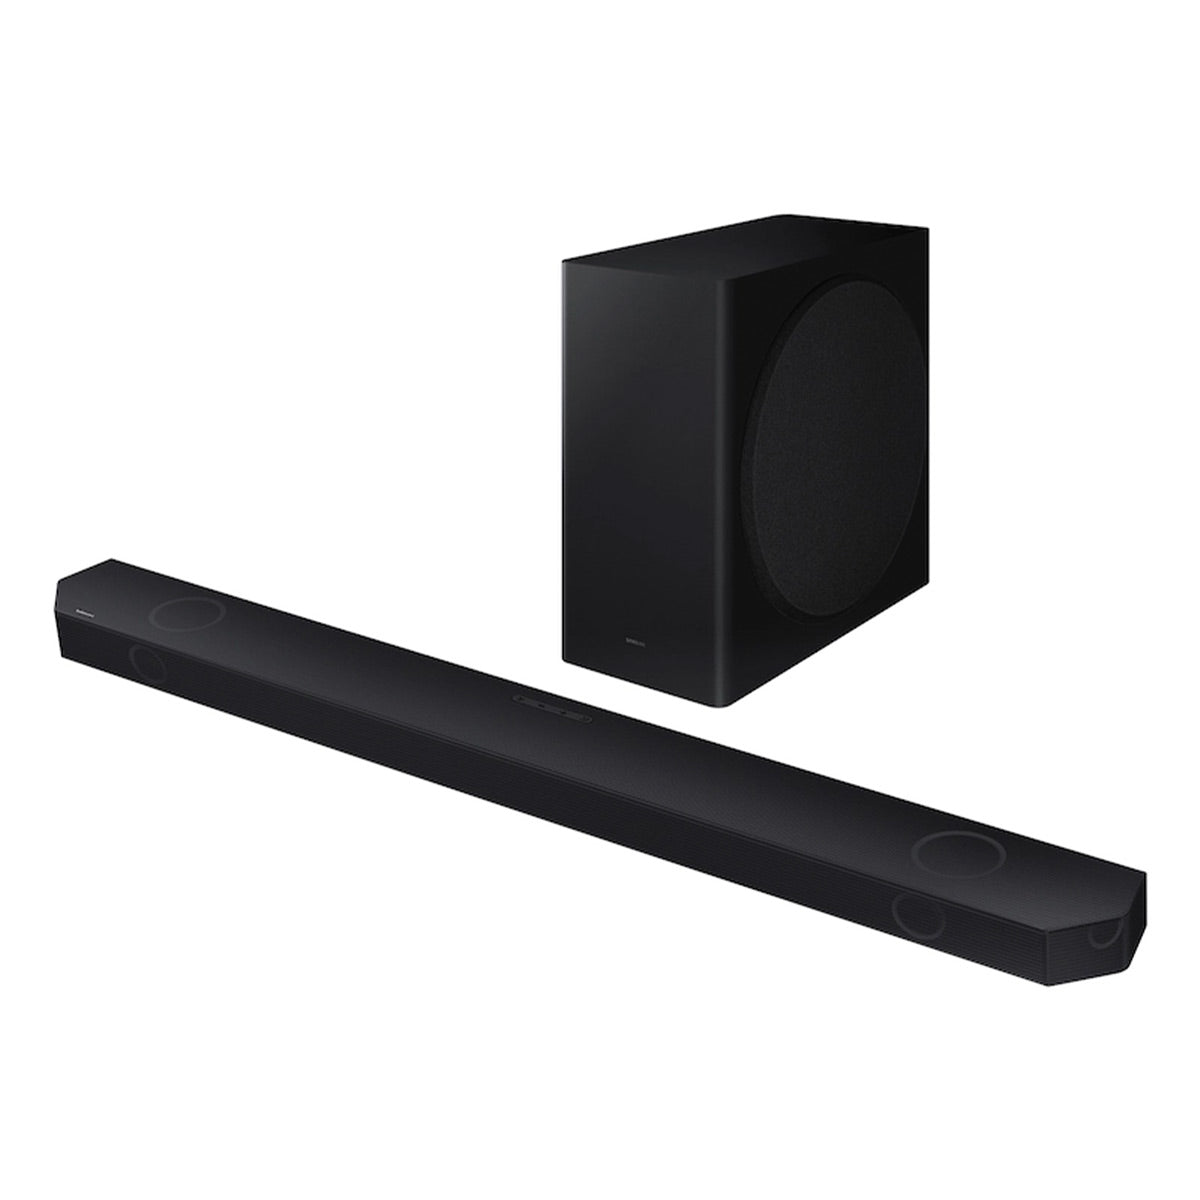 Samsung QN43Q60CA 43" QLED 4K Smart TV (2023) with HW-Q800C 5.1.2 Ch Soundbar and Wireless Subwoofer (2023)